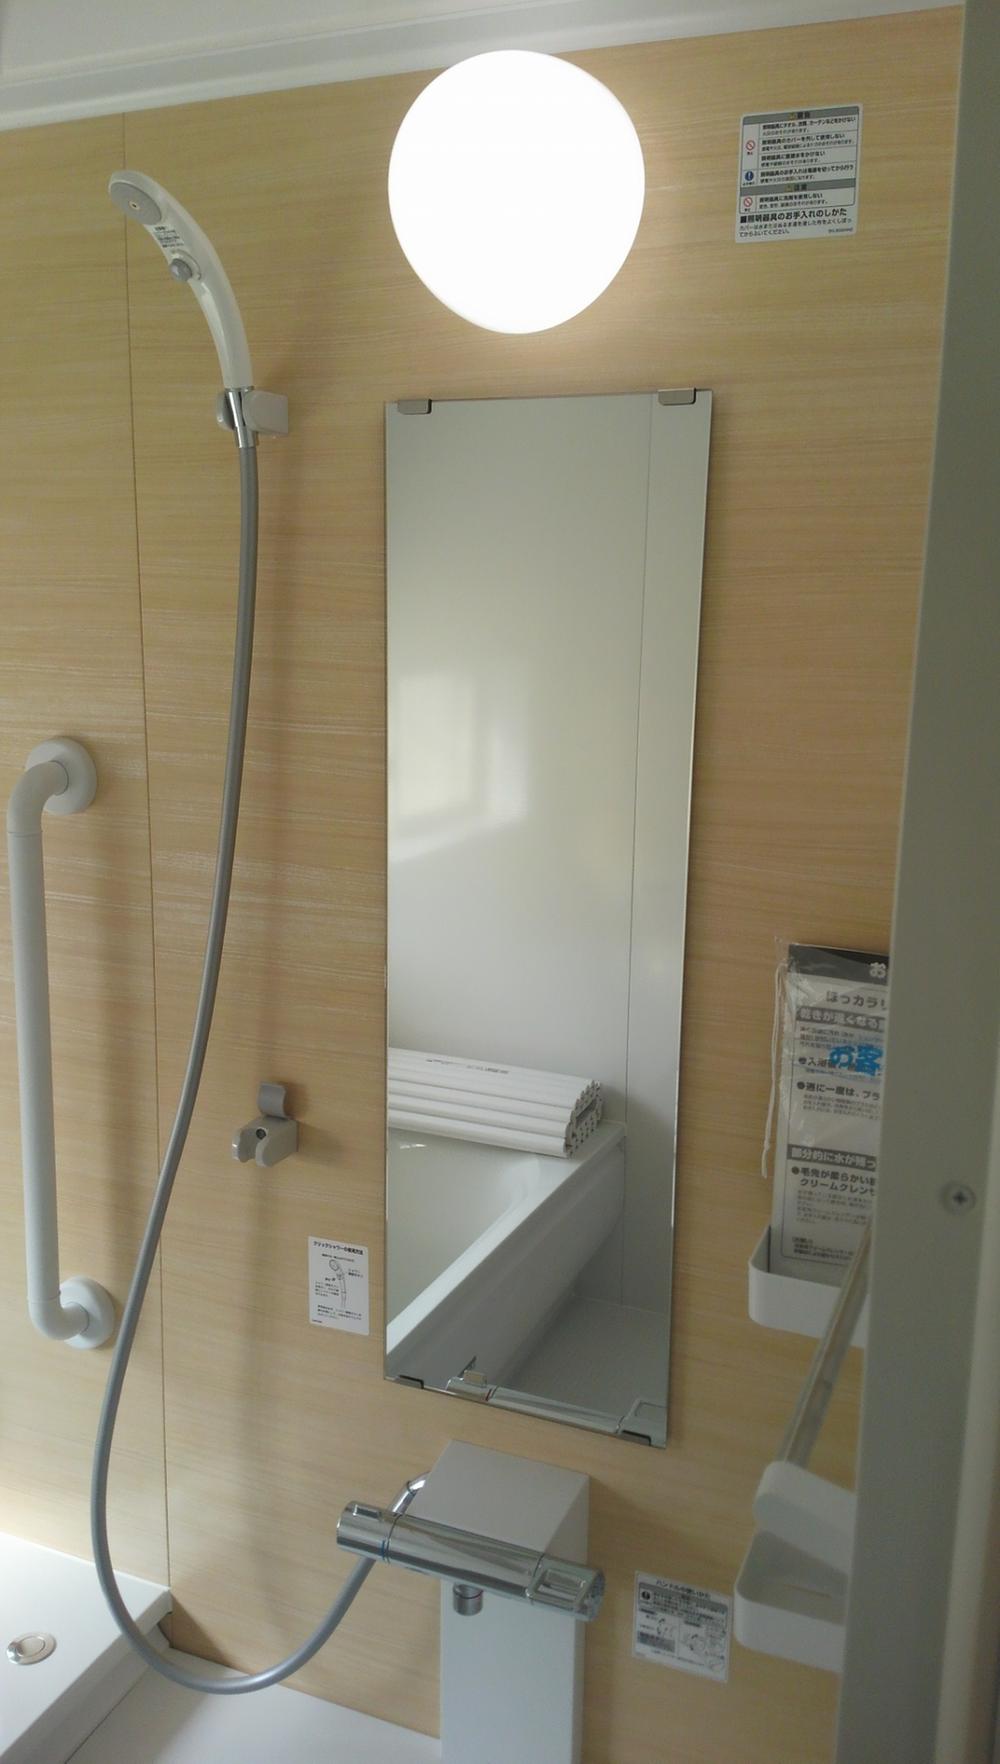 Same specifications photo (bathroom). The bathroom is a multi-function cabinet